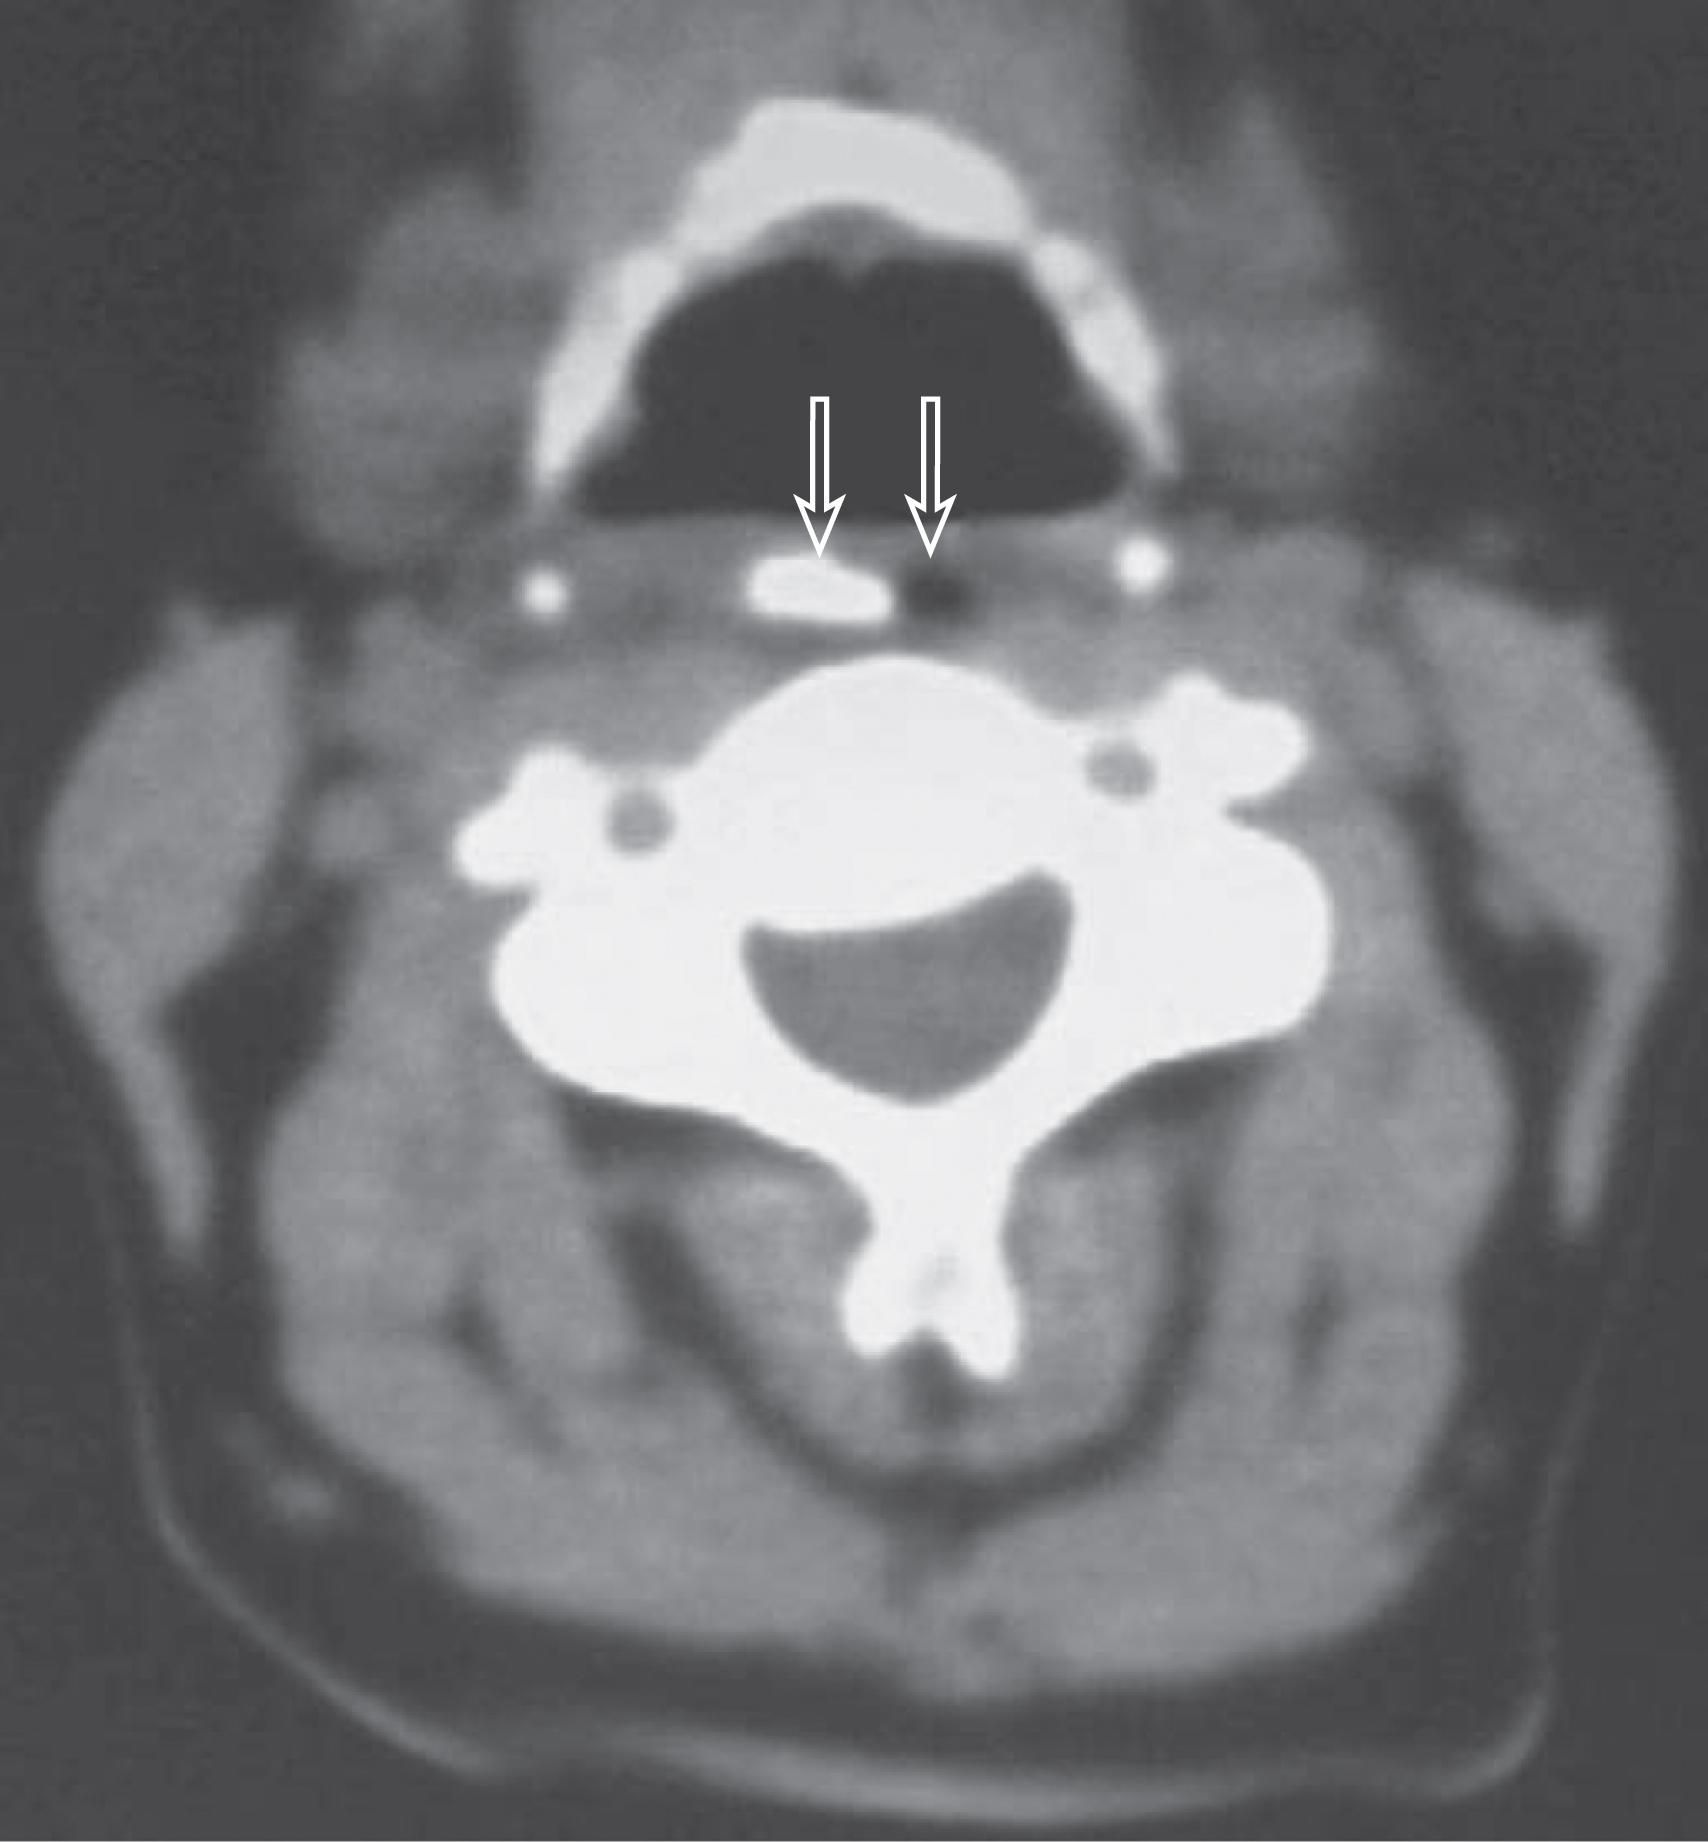 FIGURE 6, Retropharyngeal air as seen on a noncontrast CT scan of the neck.